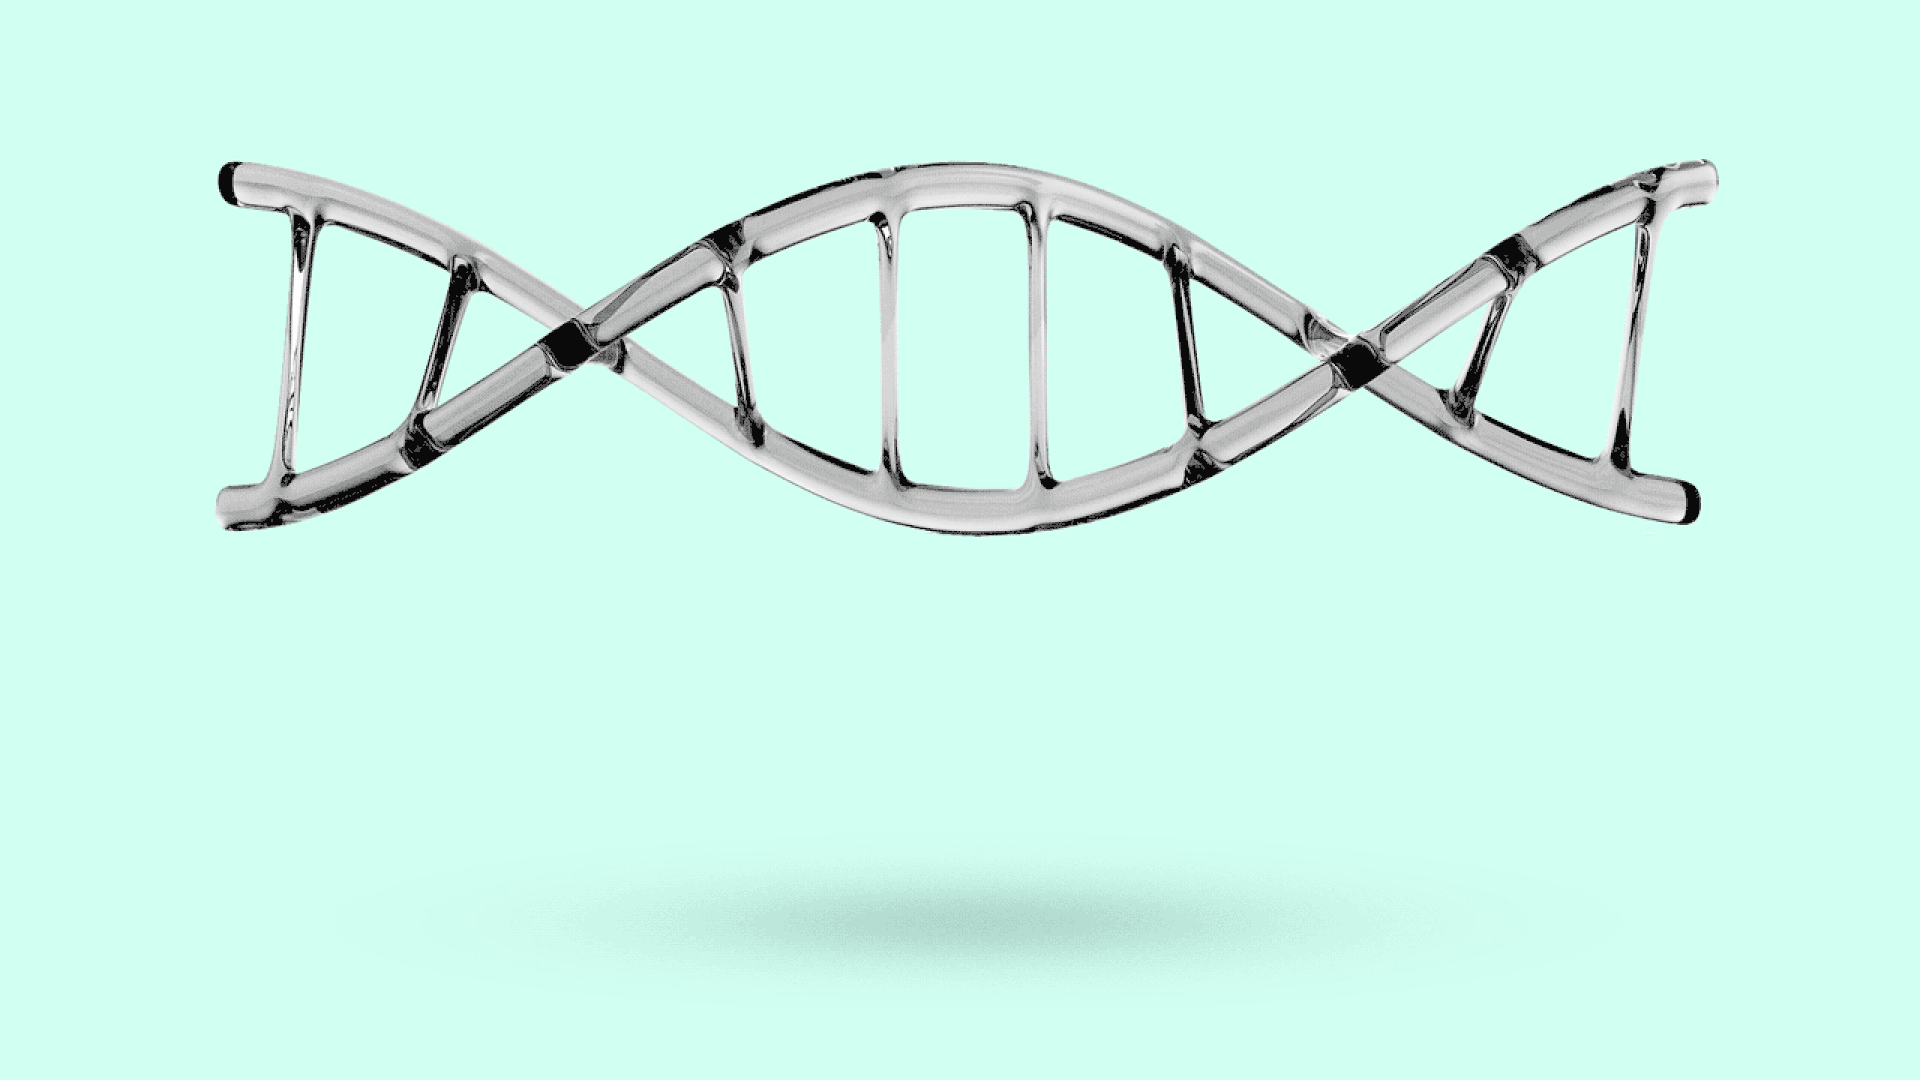 CRISPR gene therapy could advance using 1920 x 1080